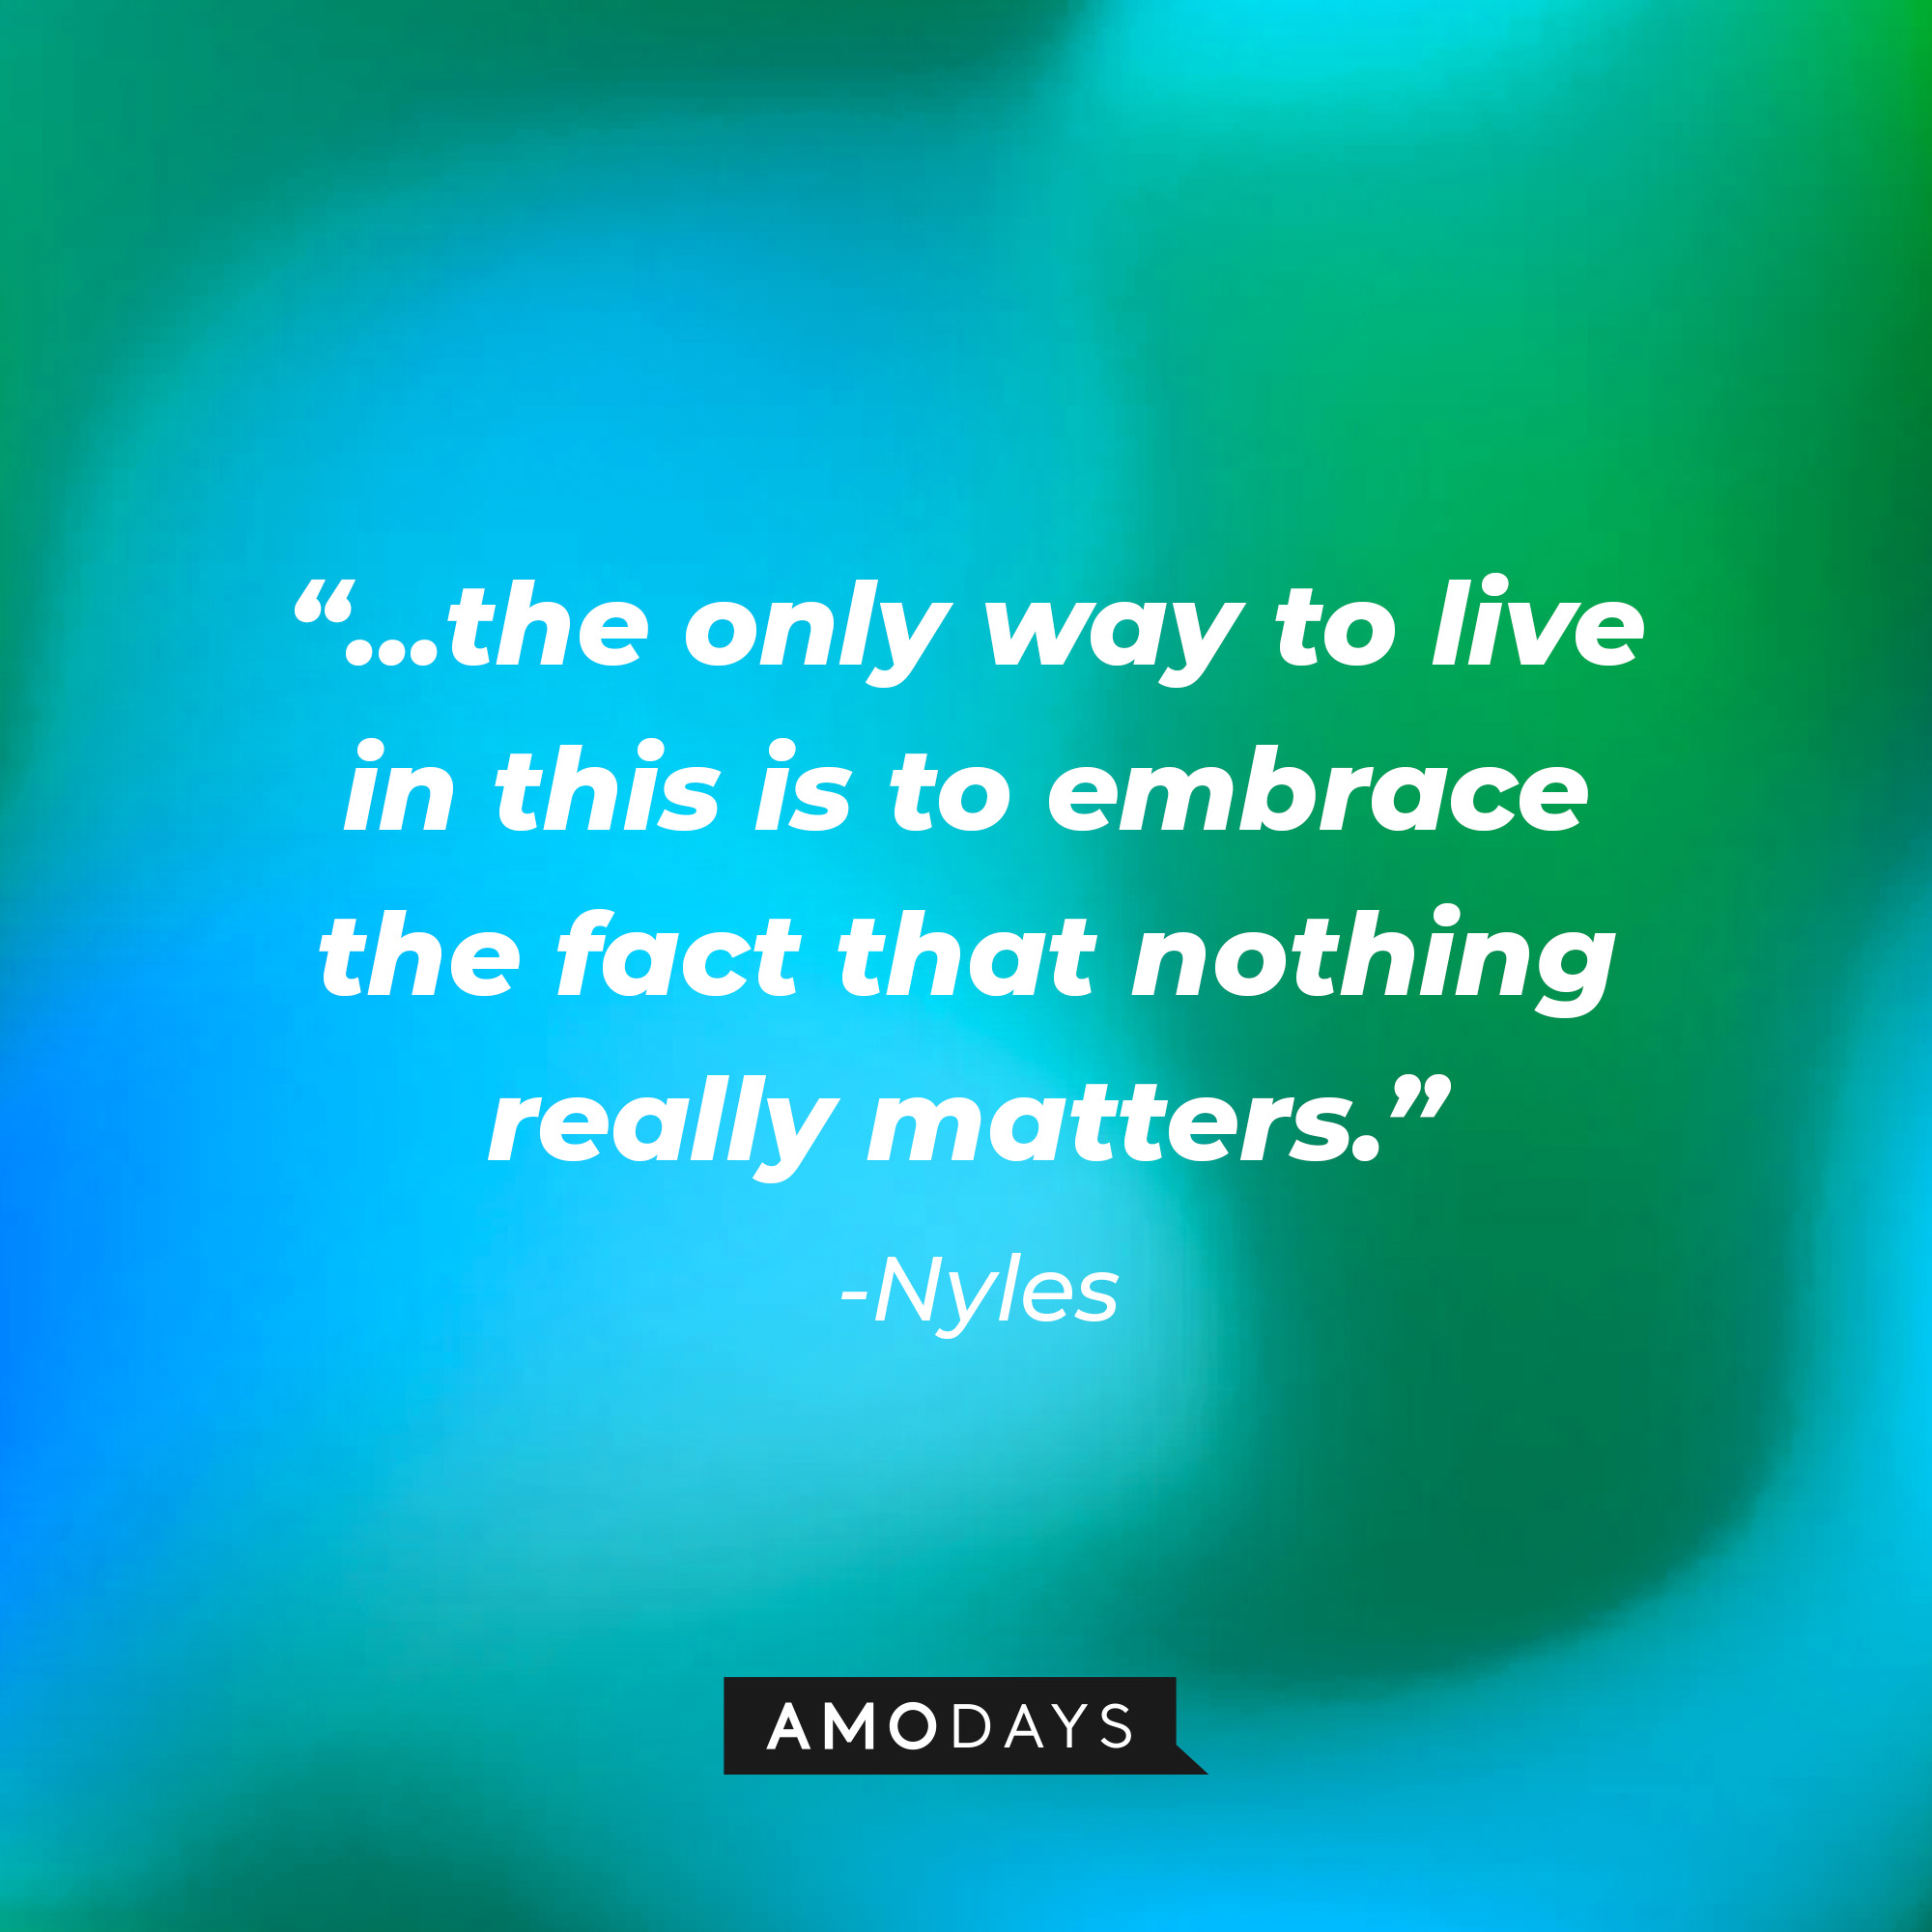 Nyles’ quote: “...the only way to live in this is to embrace the fact that nothing really matters.” │ Source: AmoDays